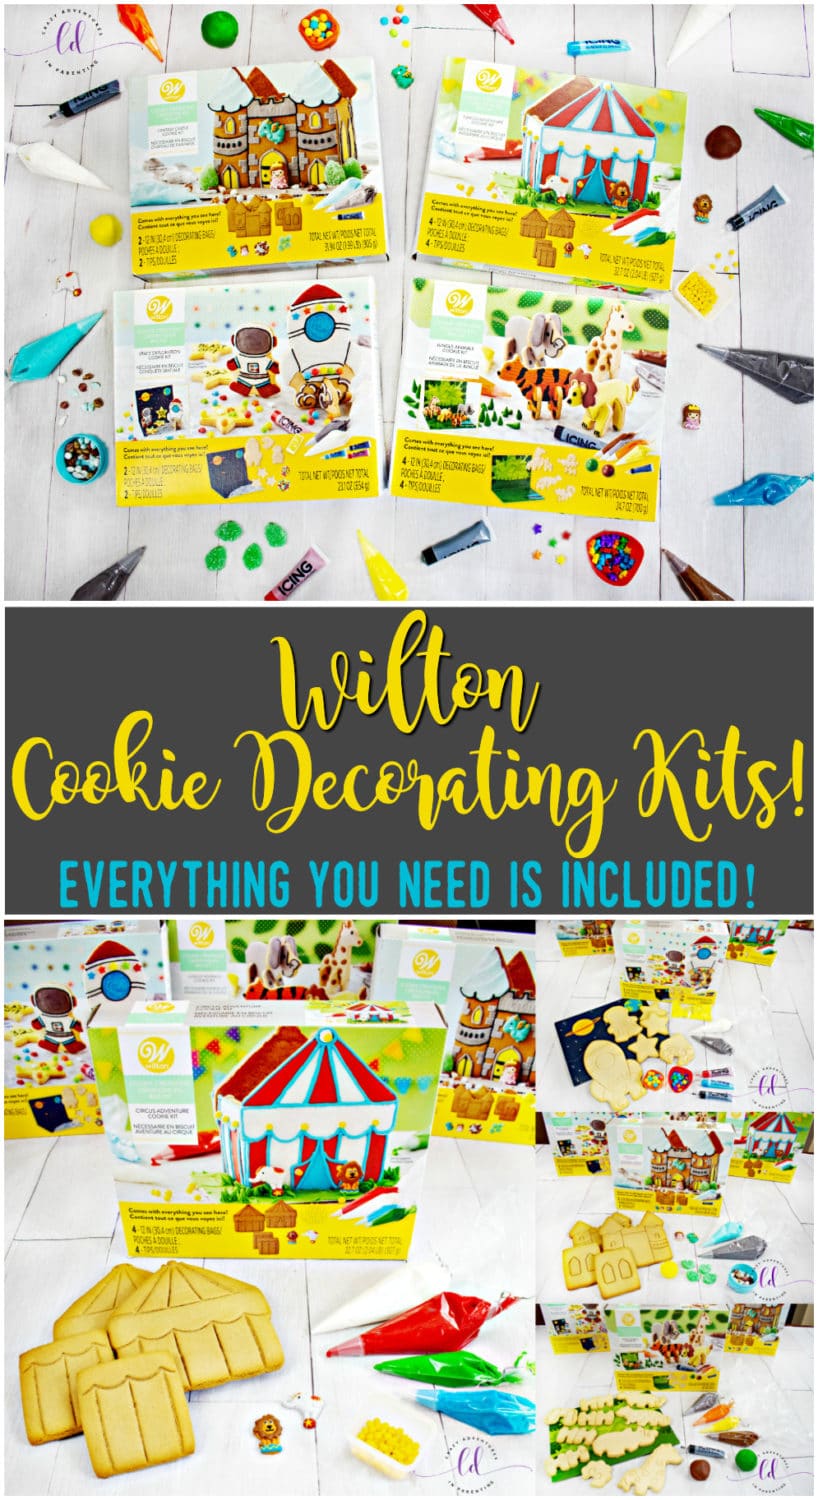 Wilton Cookie Decorating Kits - Everything You Need Is Included